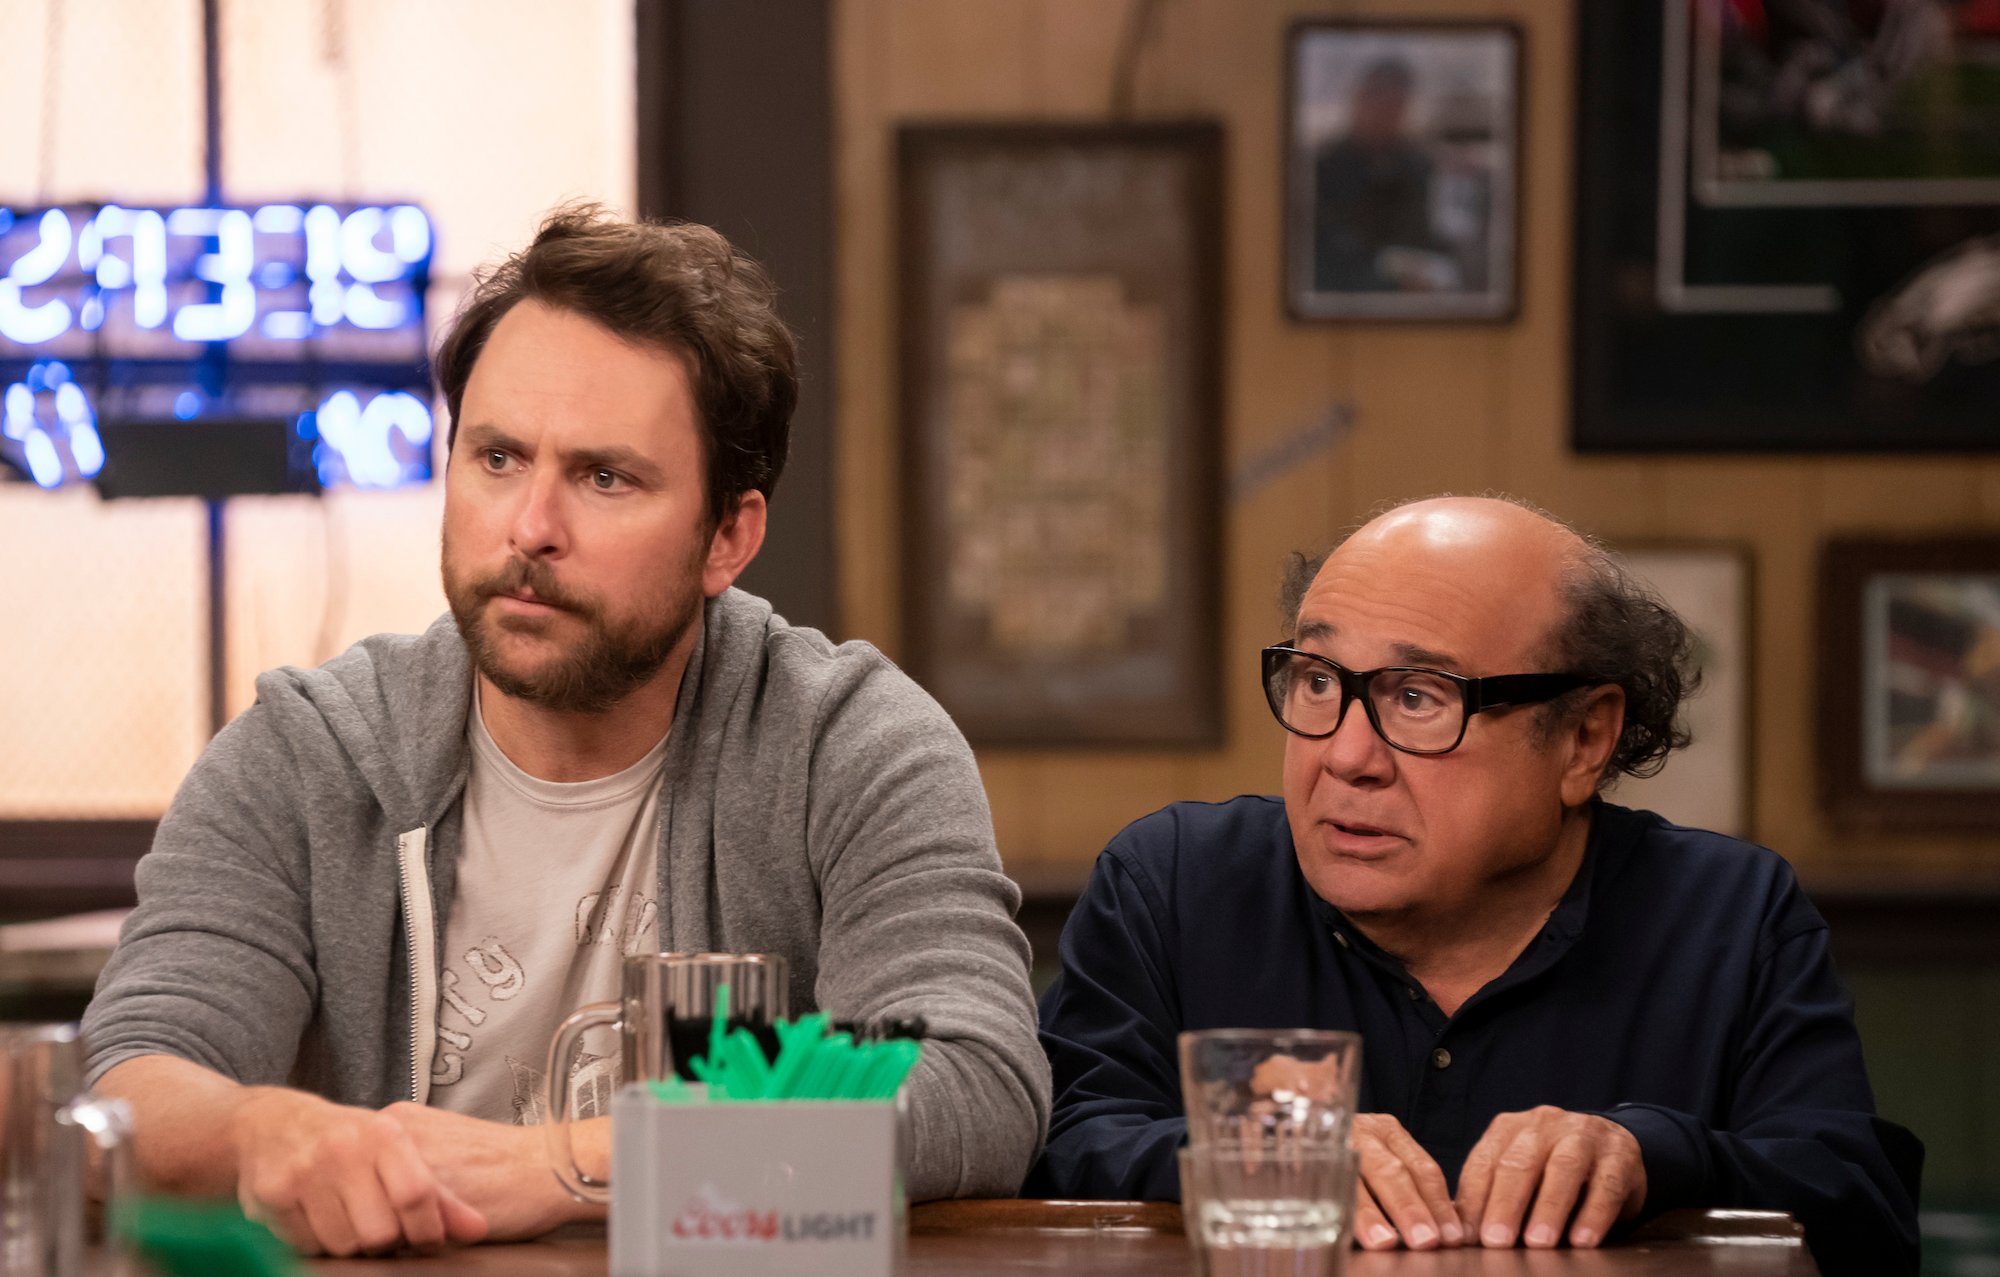 'It's Always Sunny in Philadelphia' Season 15: Charlie Day and Danny DeVito sit at the bar